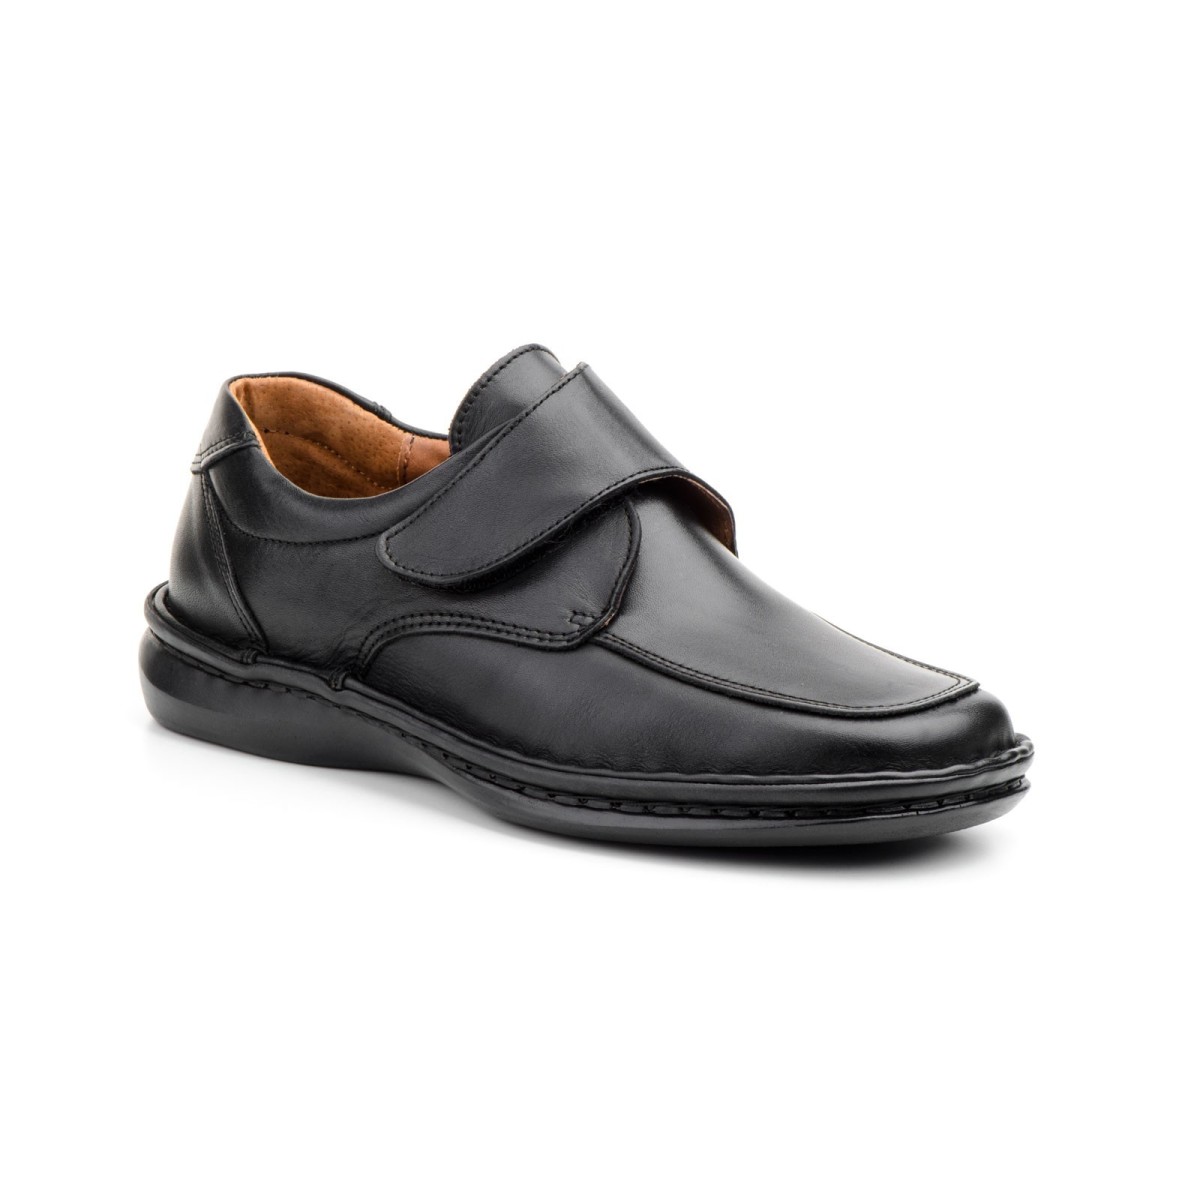 Leather shoes for men by Sachini